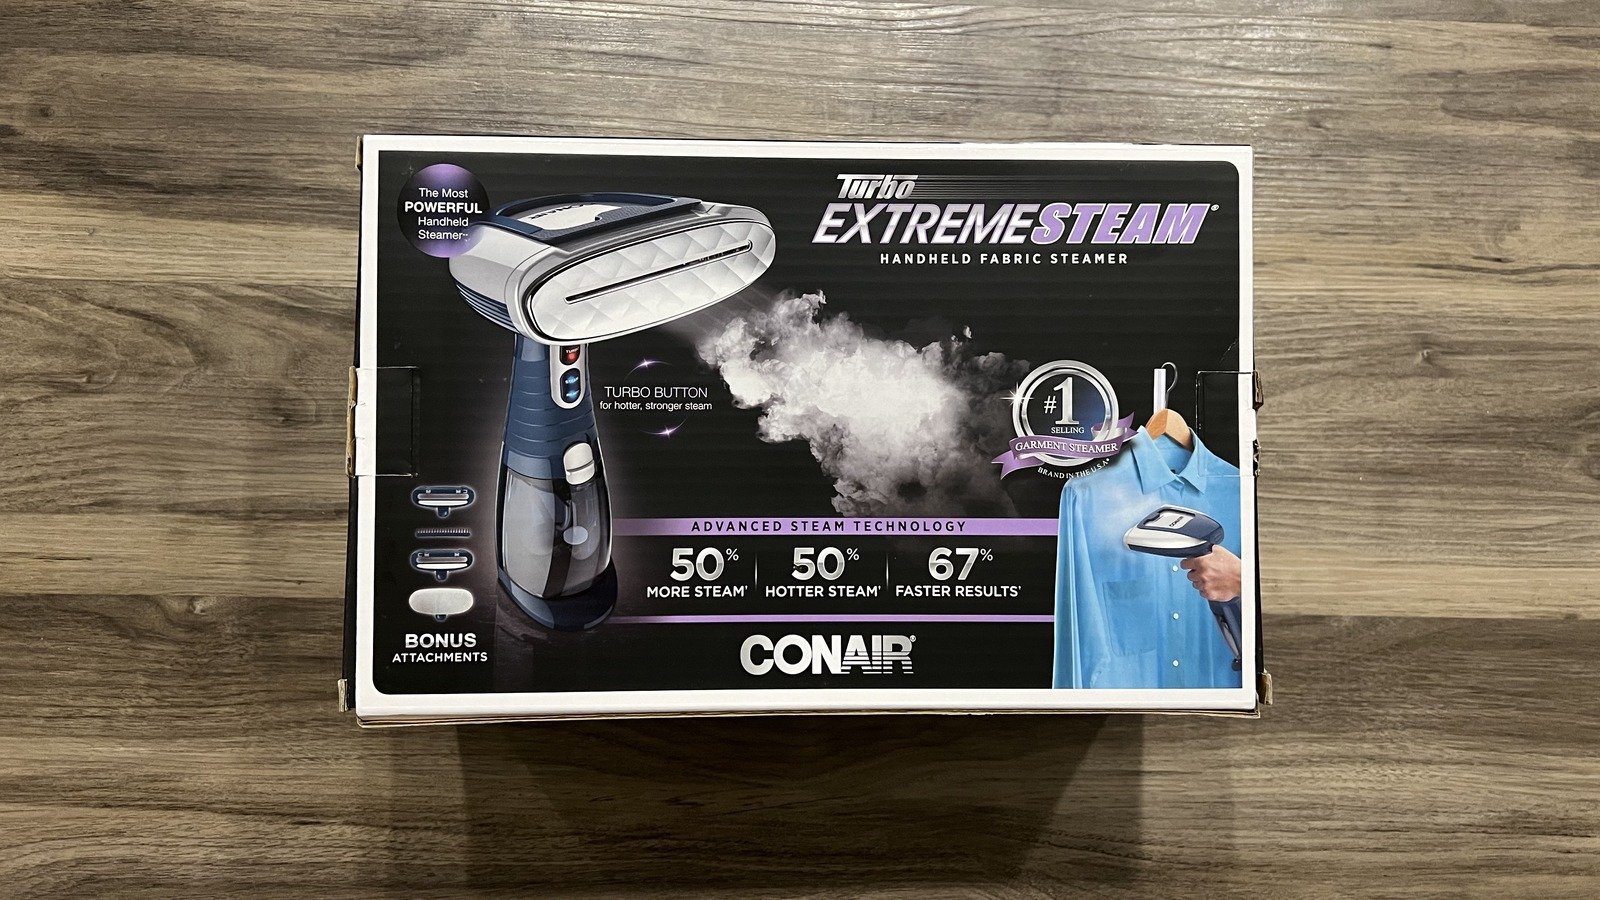 We Tried The Most Popular Clothing Steamer At Bed Bath & Beyond. Here's How It Went